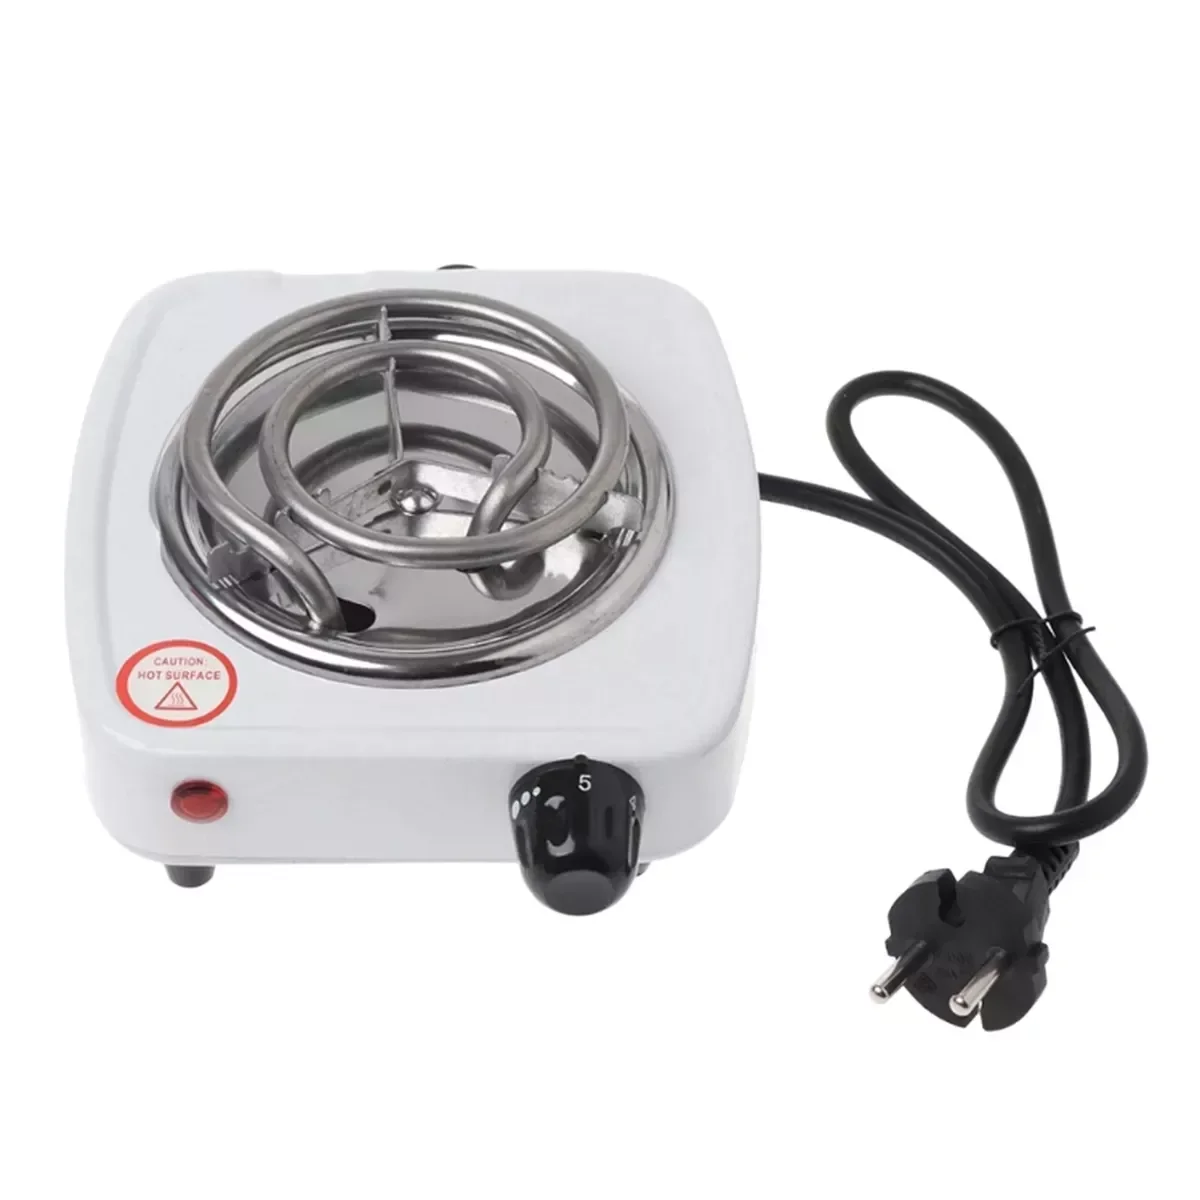 in 500W  Stove Hot Plate Iron Burner Home Kitchen Cooker Coffee Heater Household Cooking Appliances EU Plug air fryer home a